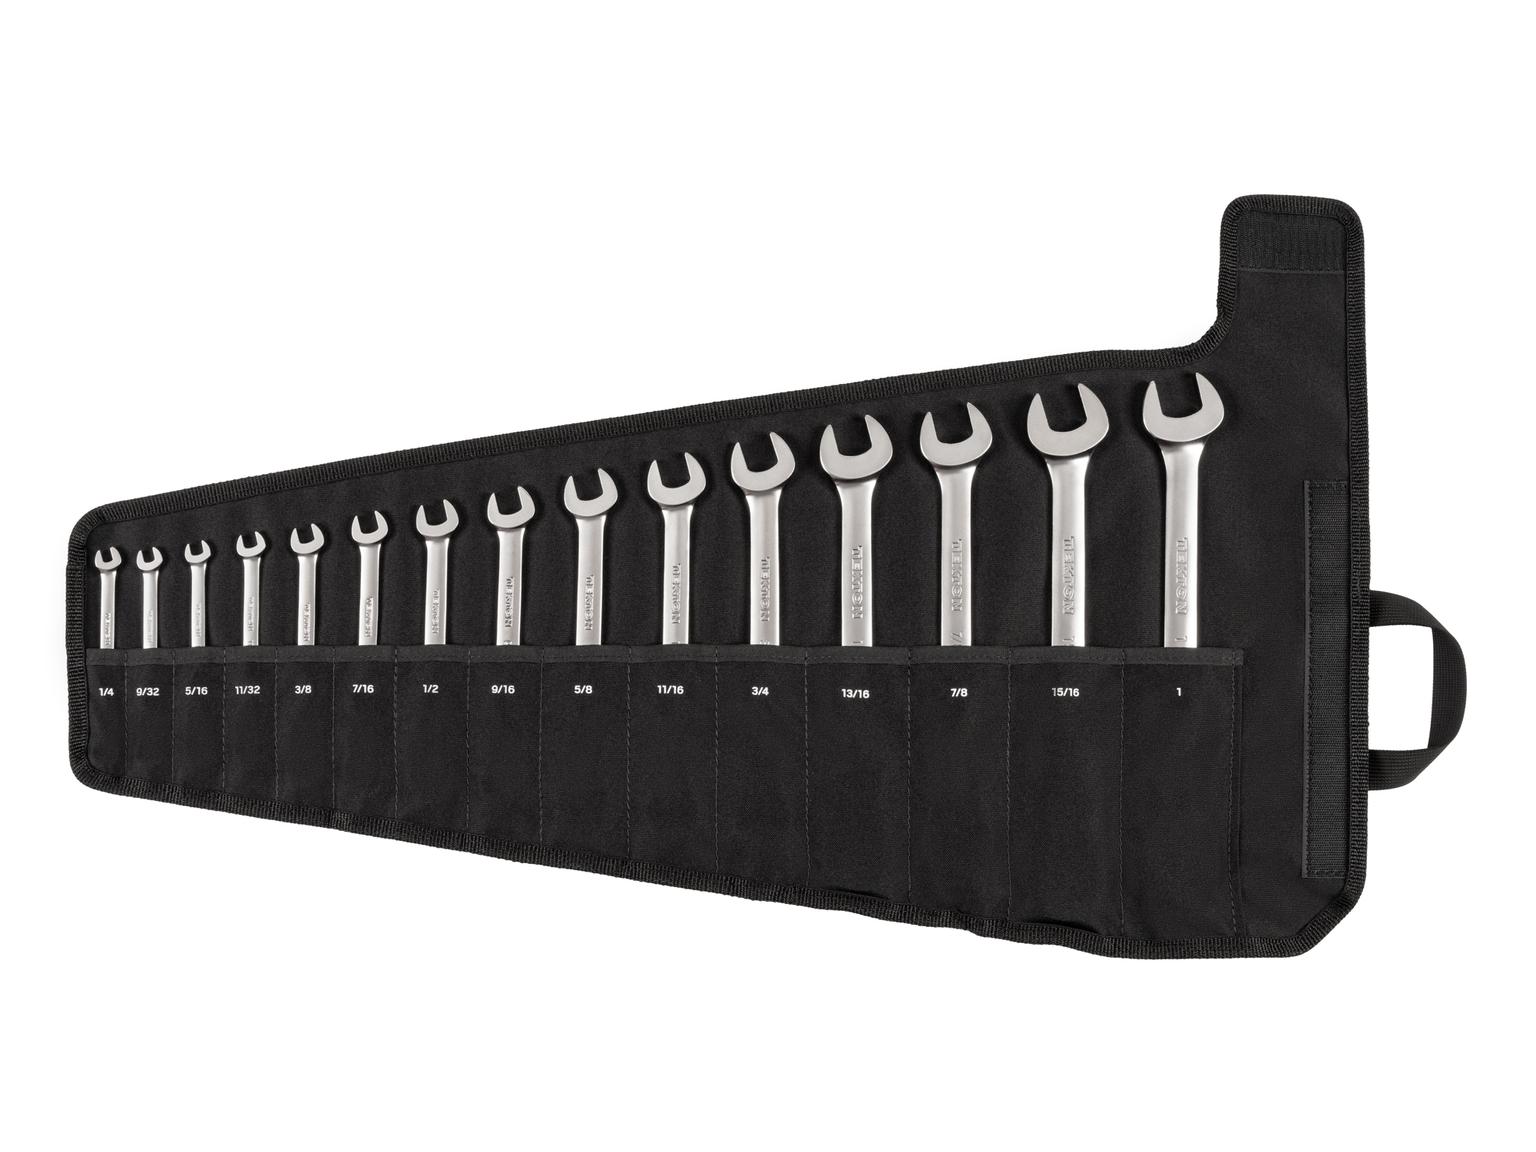 Flex Head 12-Point Ratcheting Combination Wrench Set, 15-Piece (Pouch)